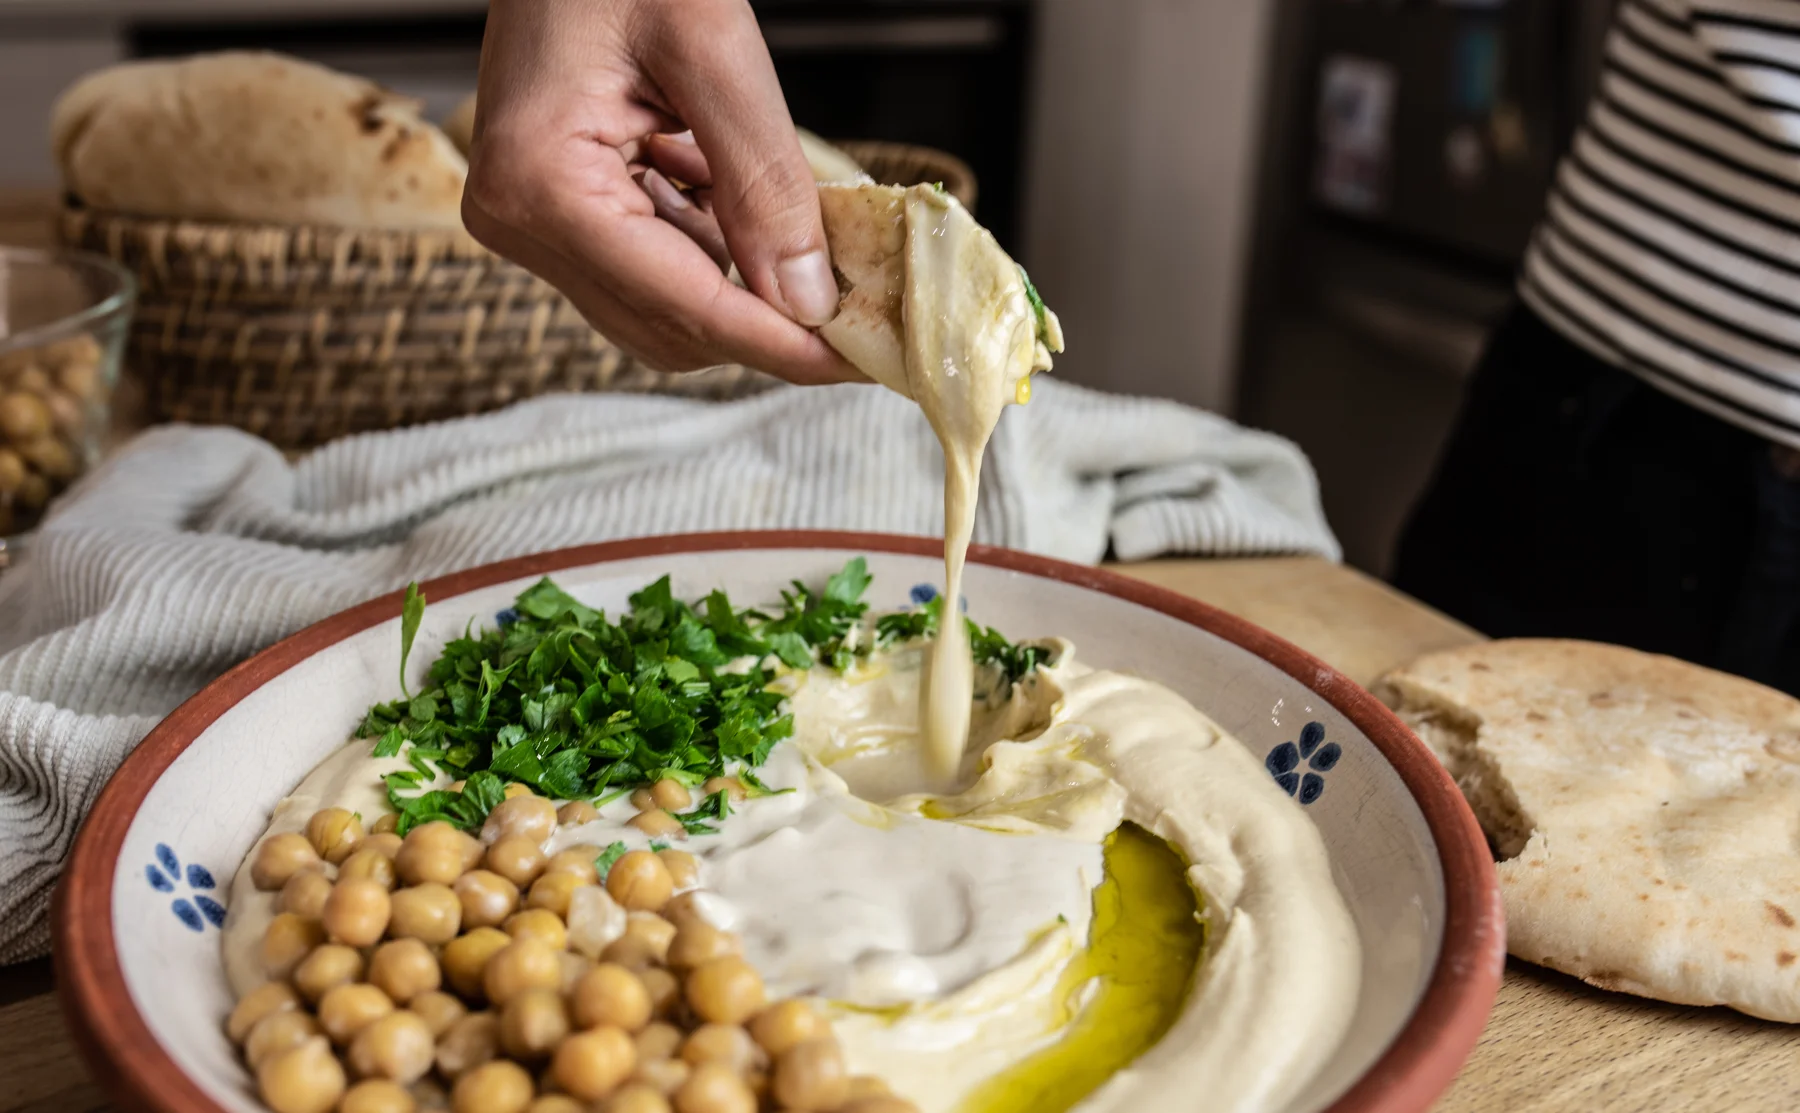 Try Your Hand At Israeli Home Cooking - 1283489